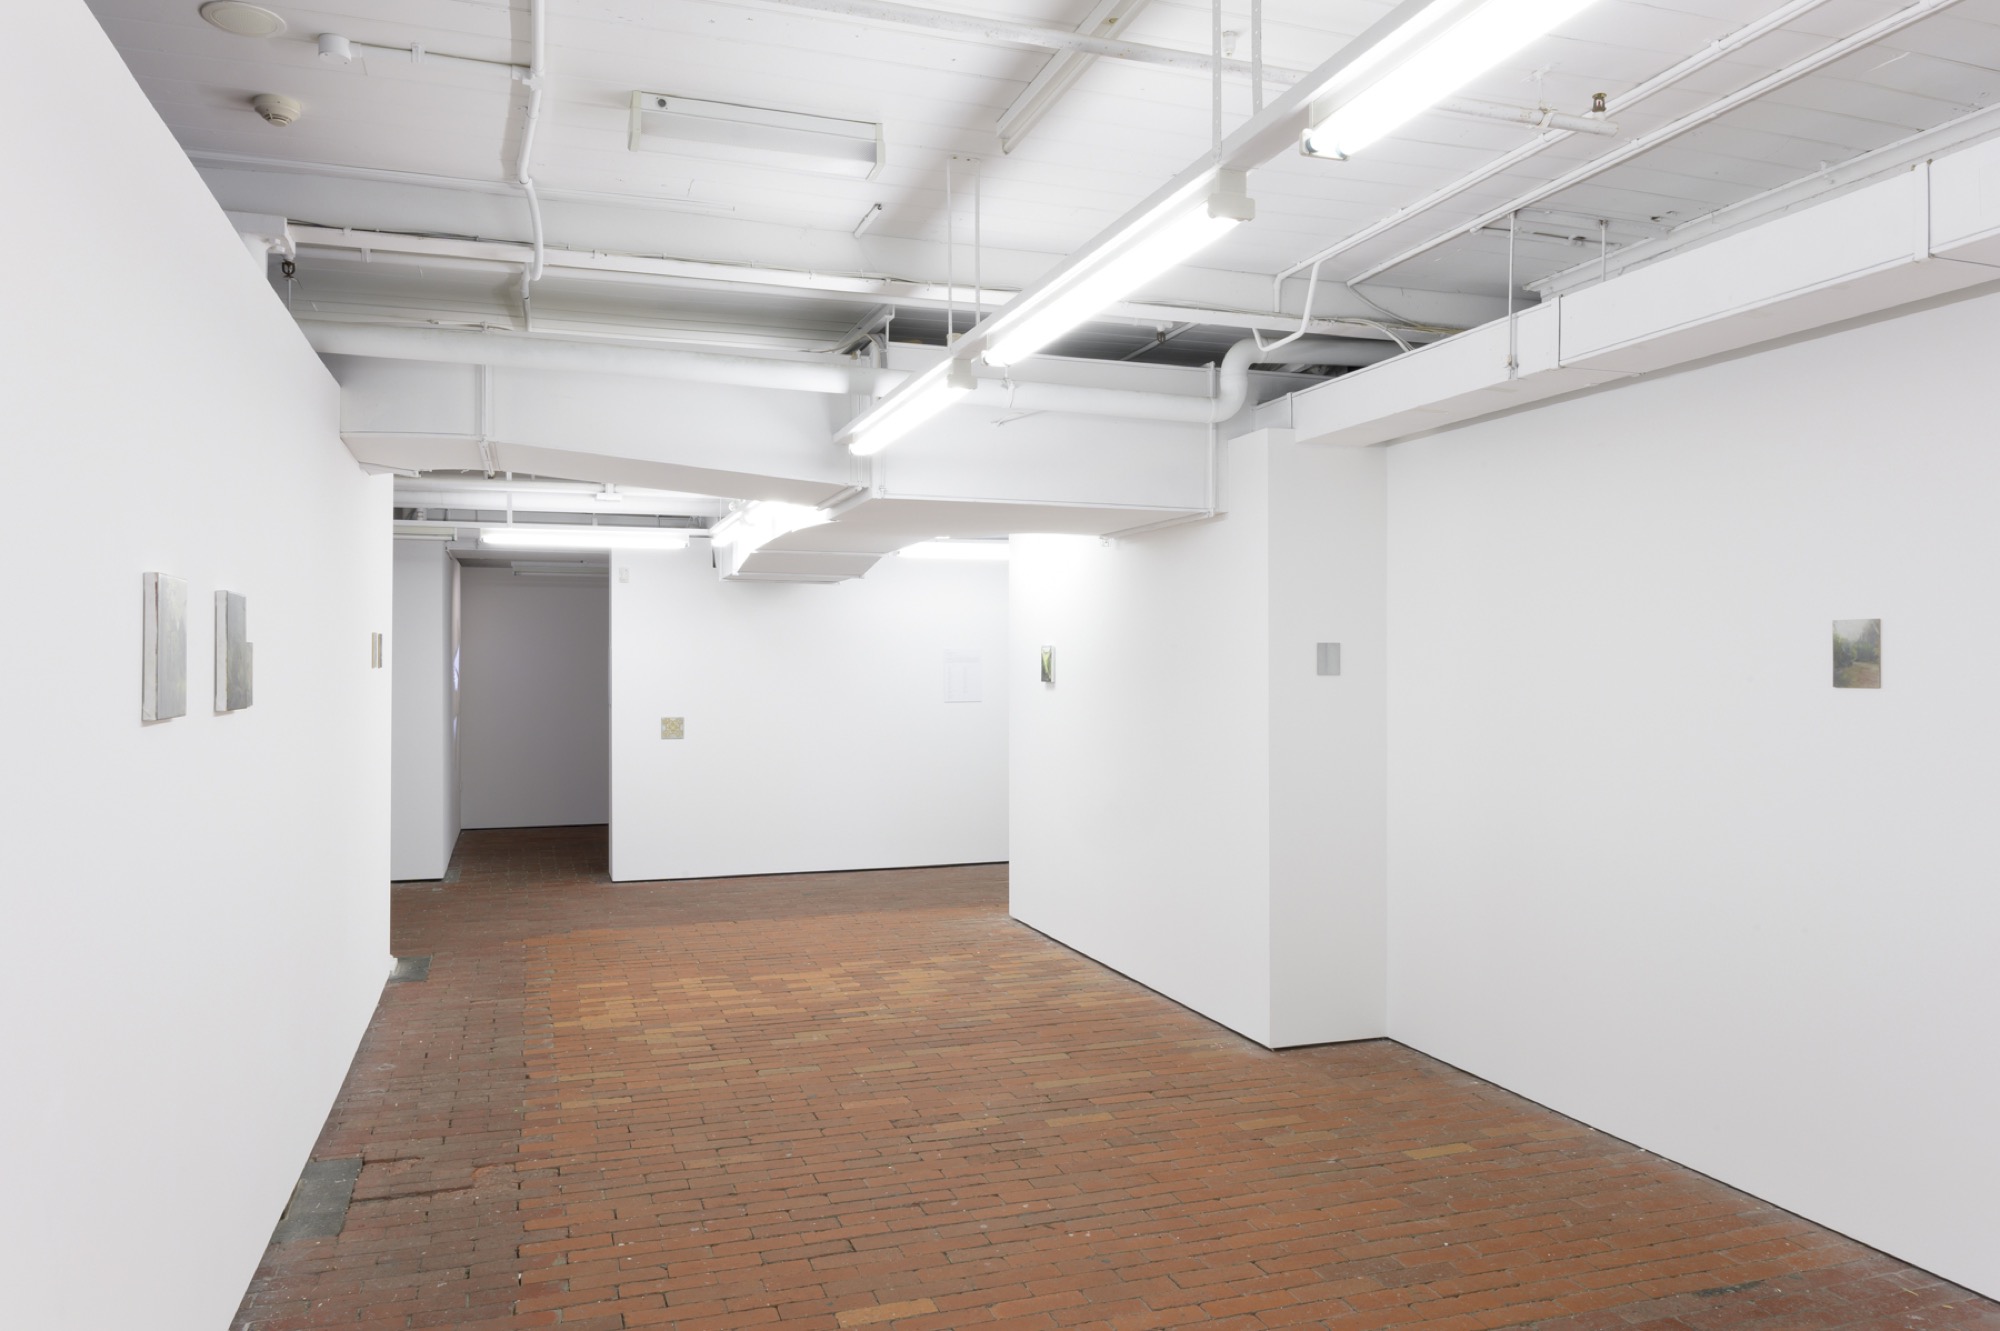 Kate Wallace, installation view, Views to remember, photo: Aaron Christopher Rees